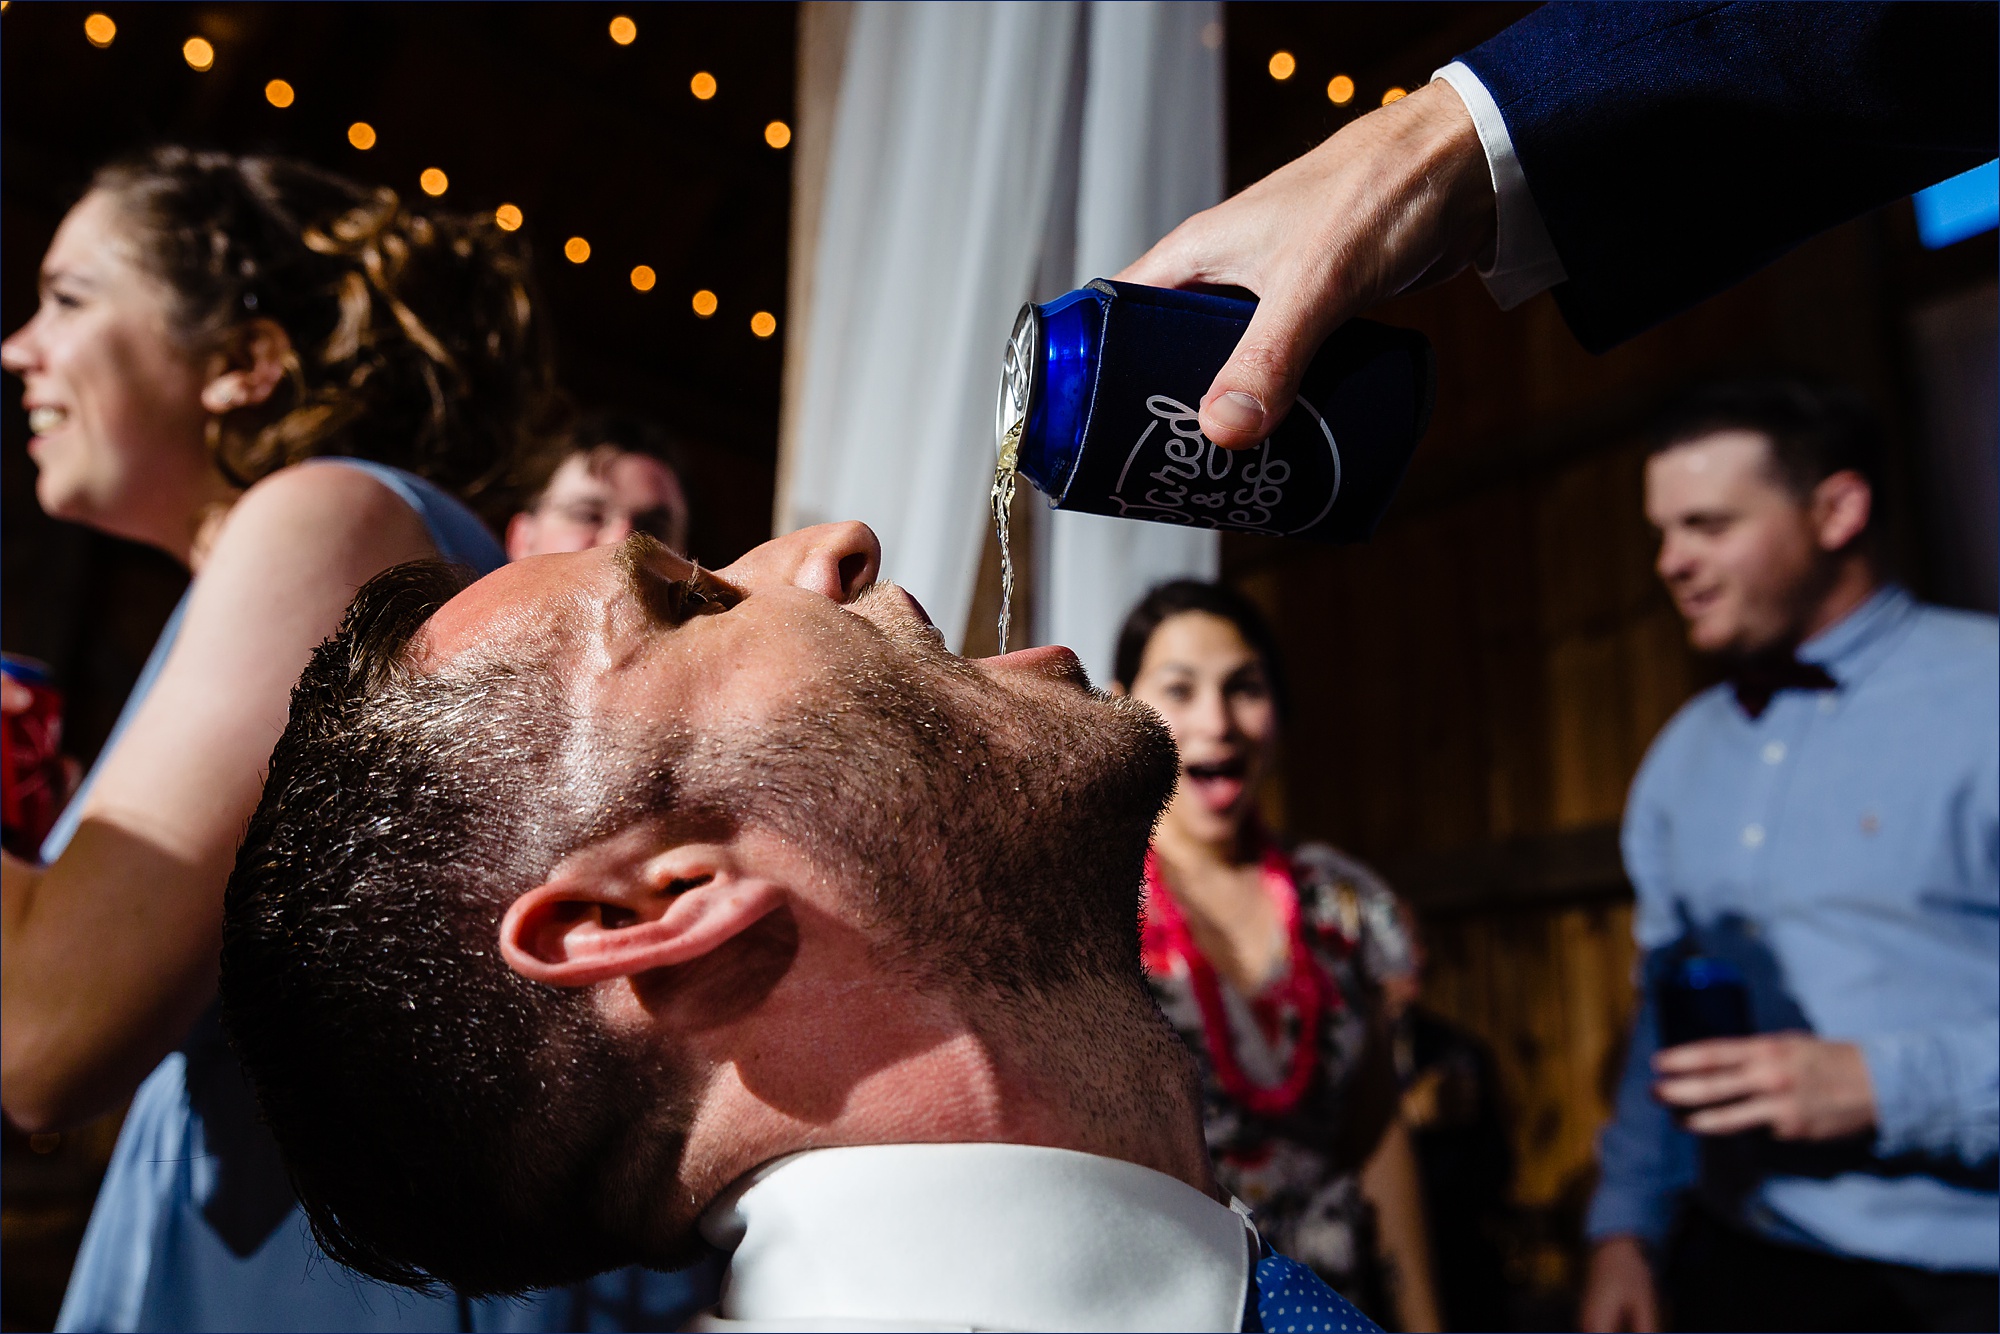 One of the groomsmen gets a tasty beer poured into his mouth at the New Hampshire wedding reception